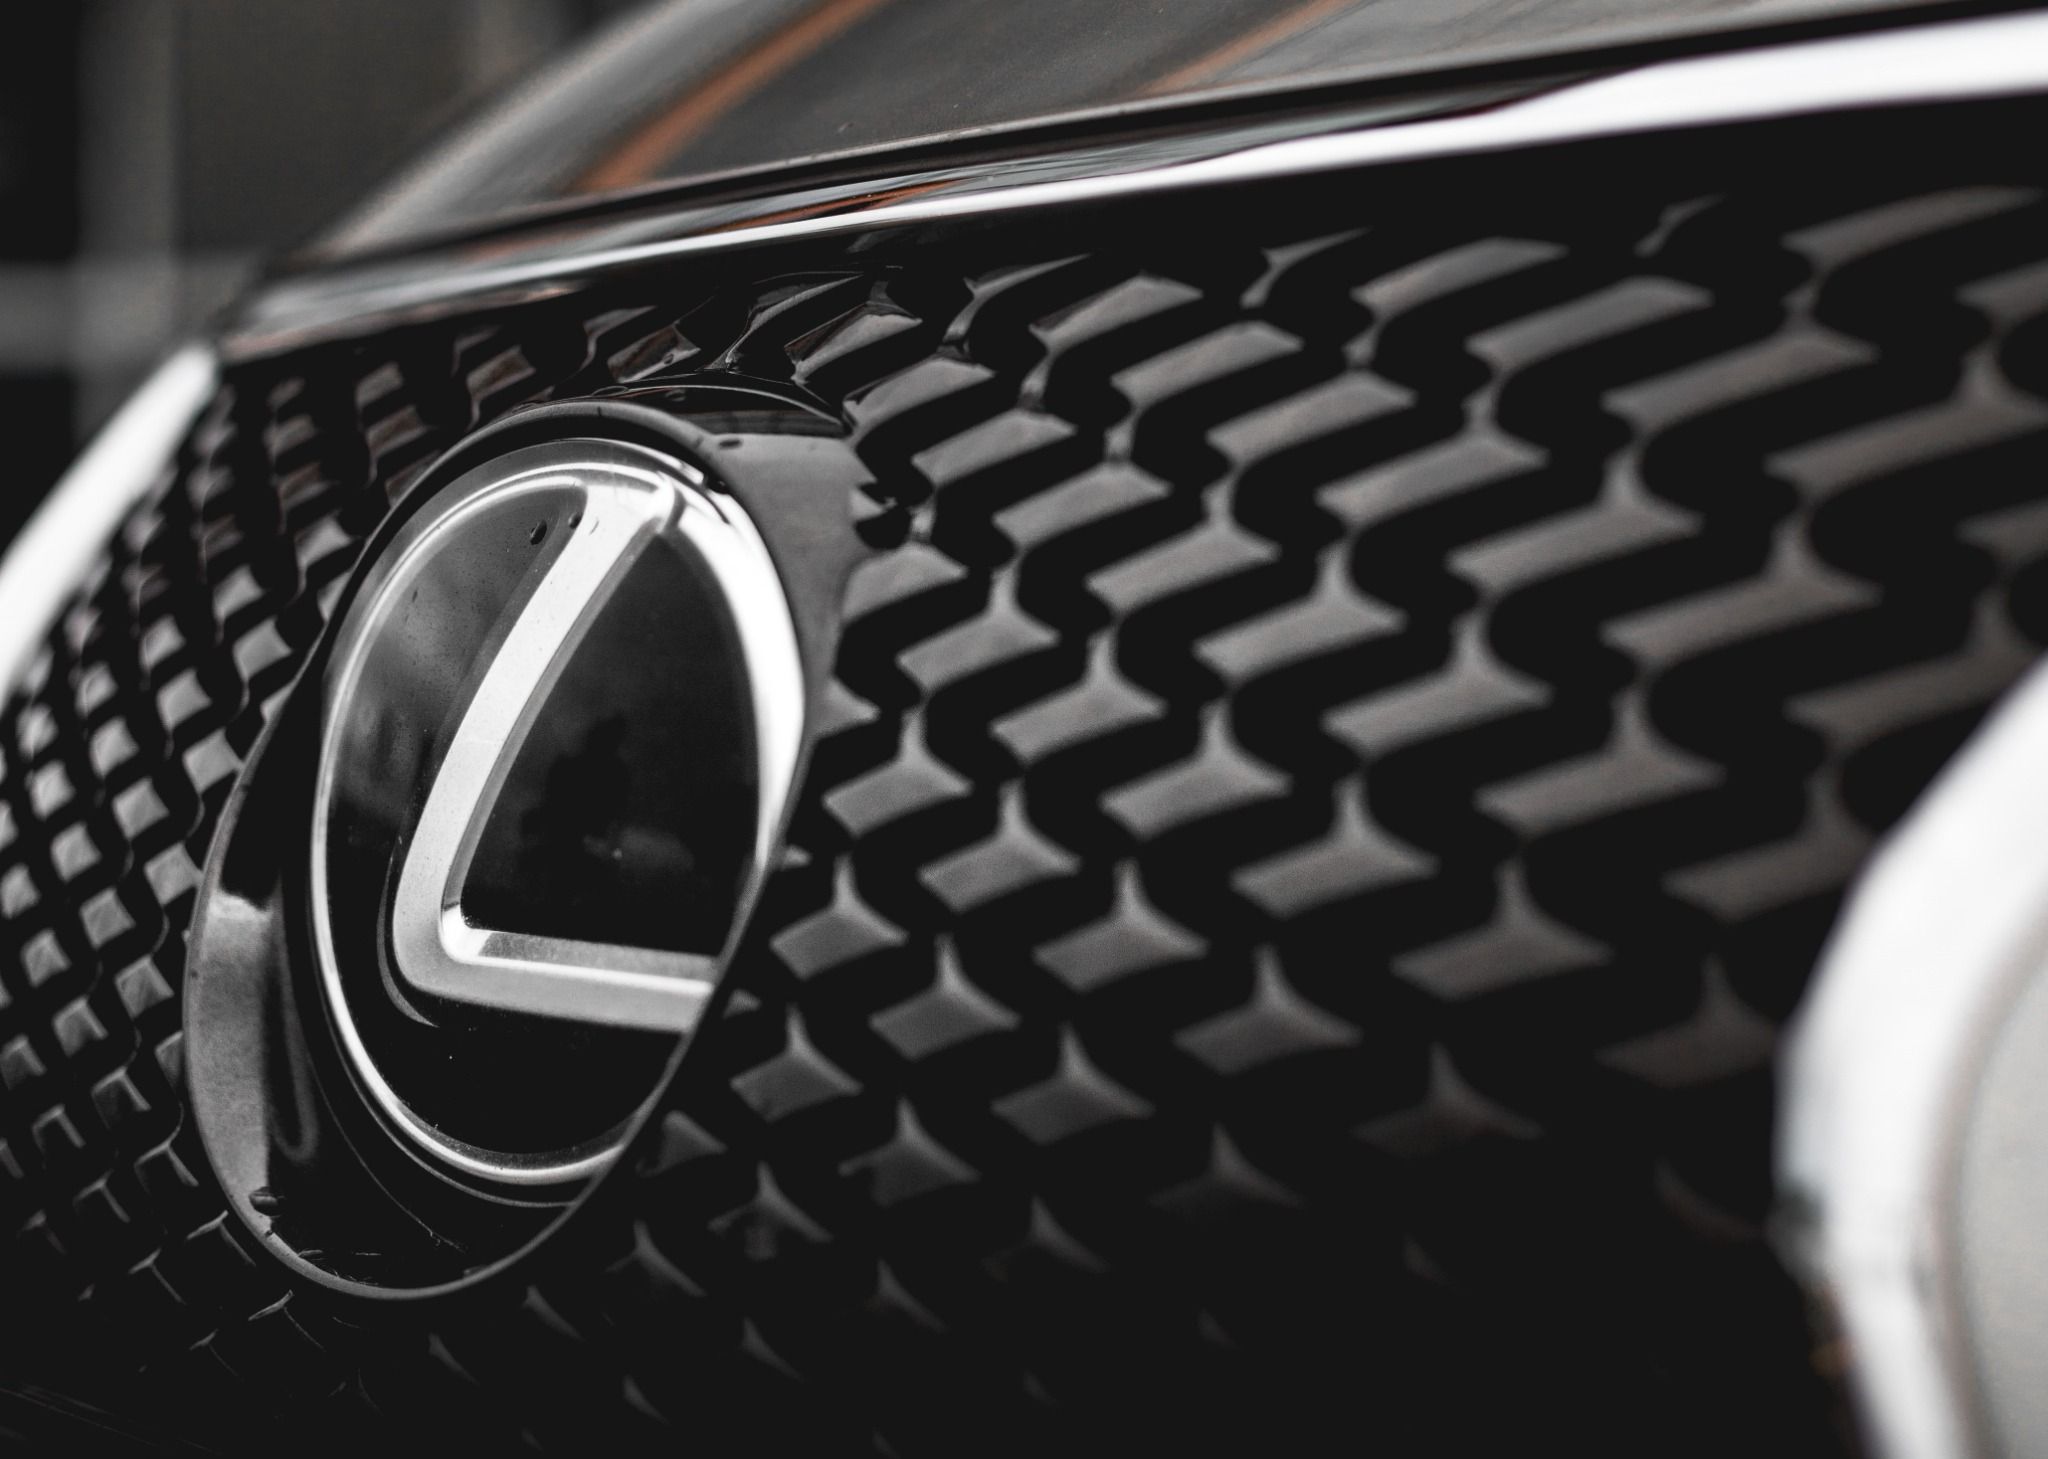 Lexus Grille with Badge